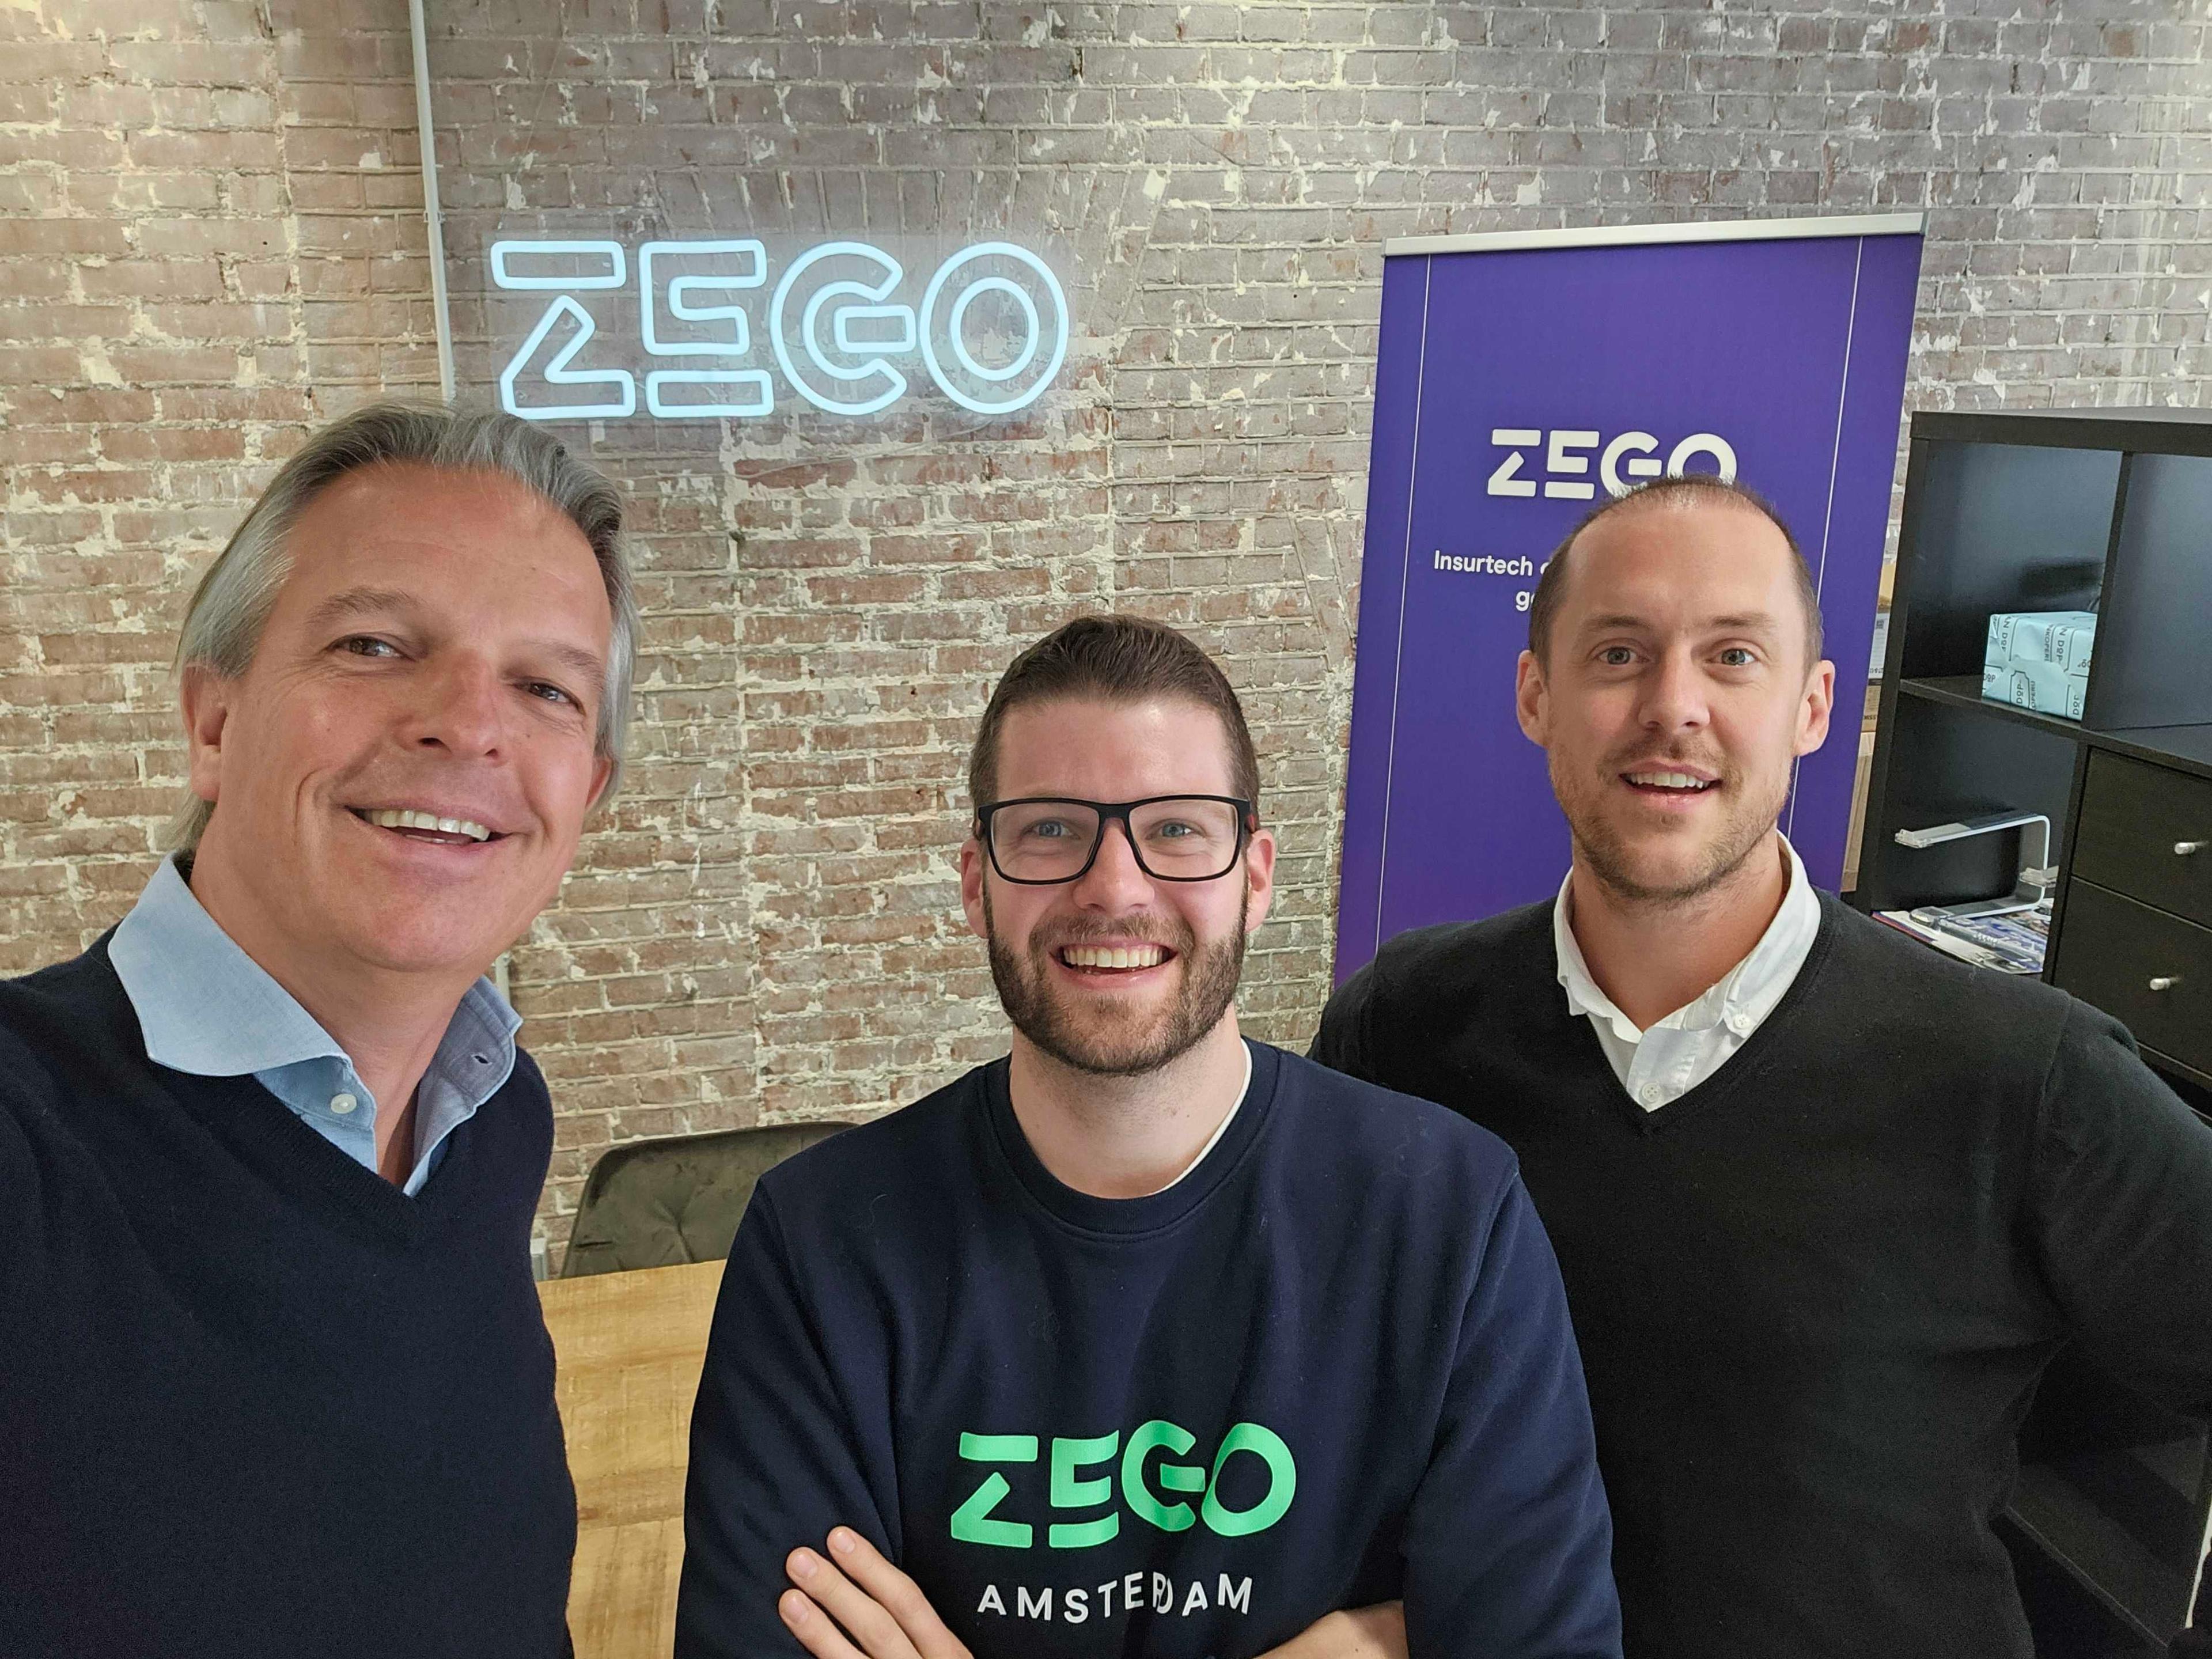 Colleagues in the Zego Amsterdam office